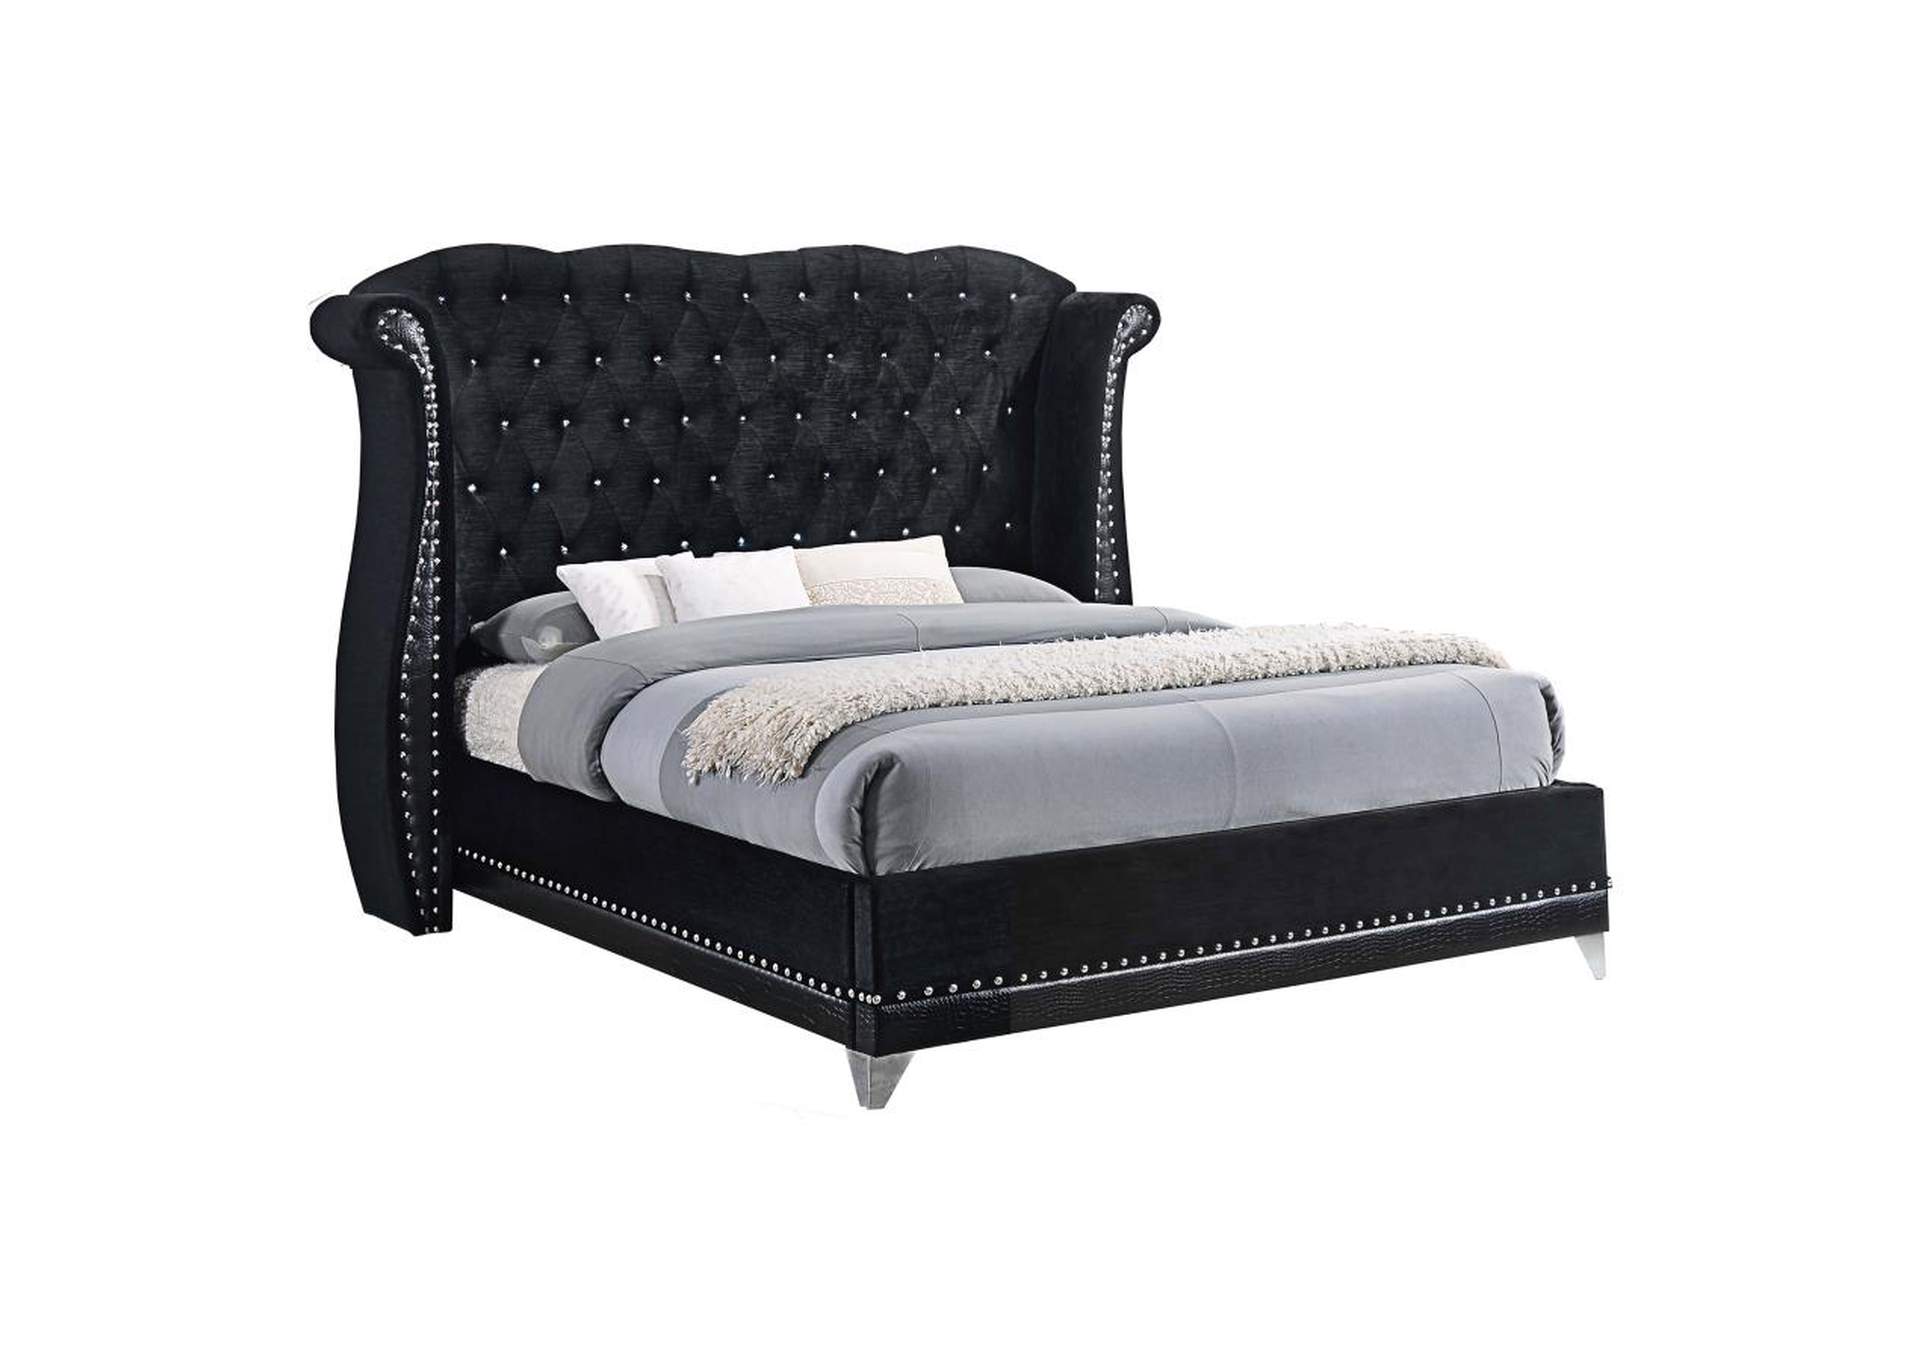 Barzini Queen Tufted Upholstered Bed Black,Coaster Furniture